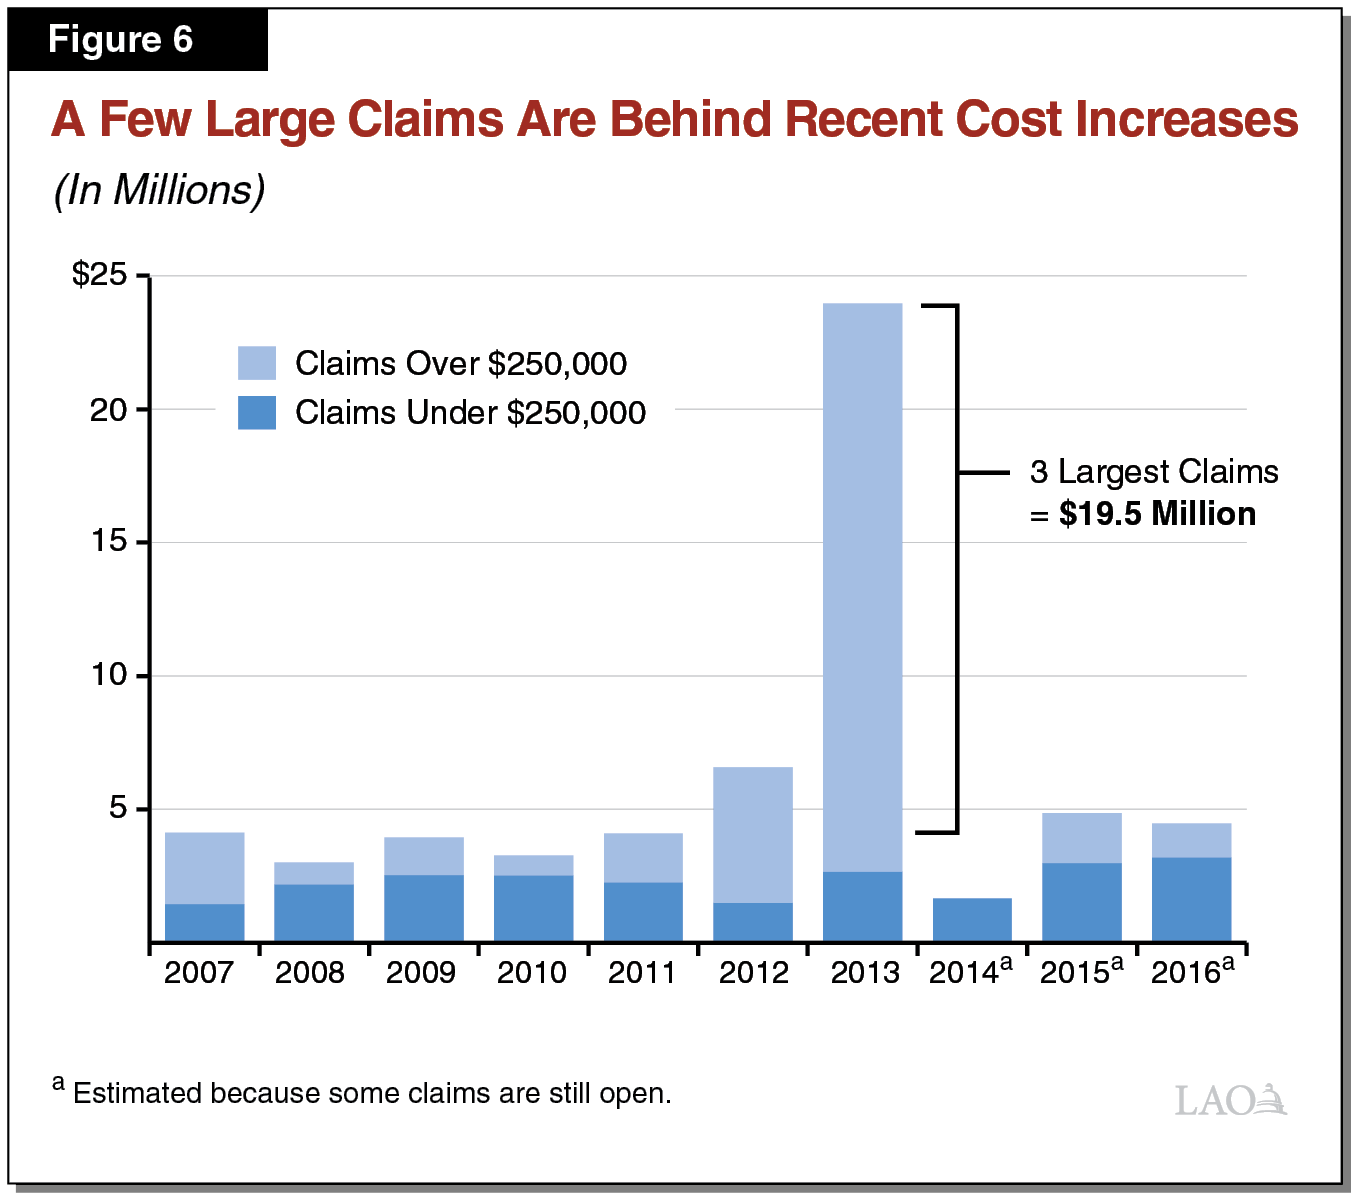 Figure 6 - A Few Large Claims Are Behind Recent Cost Increases